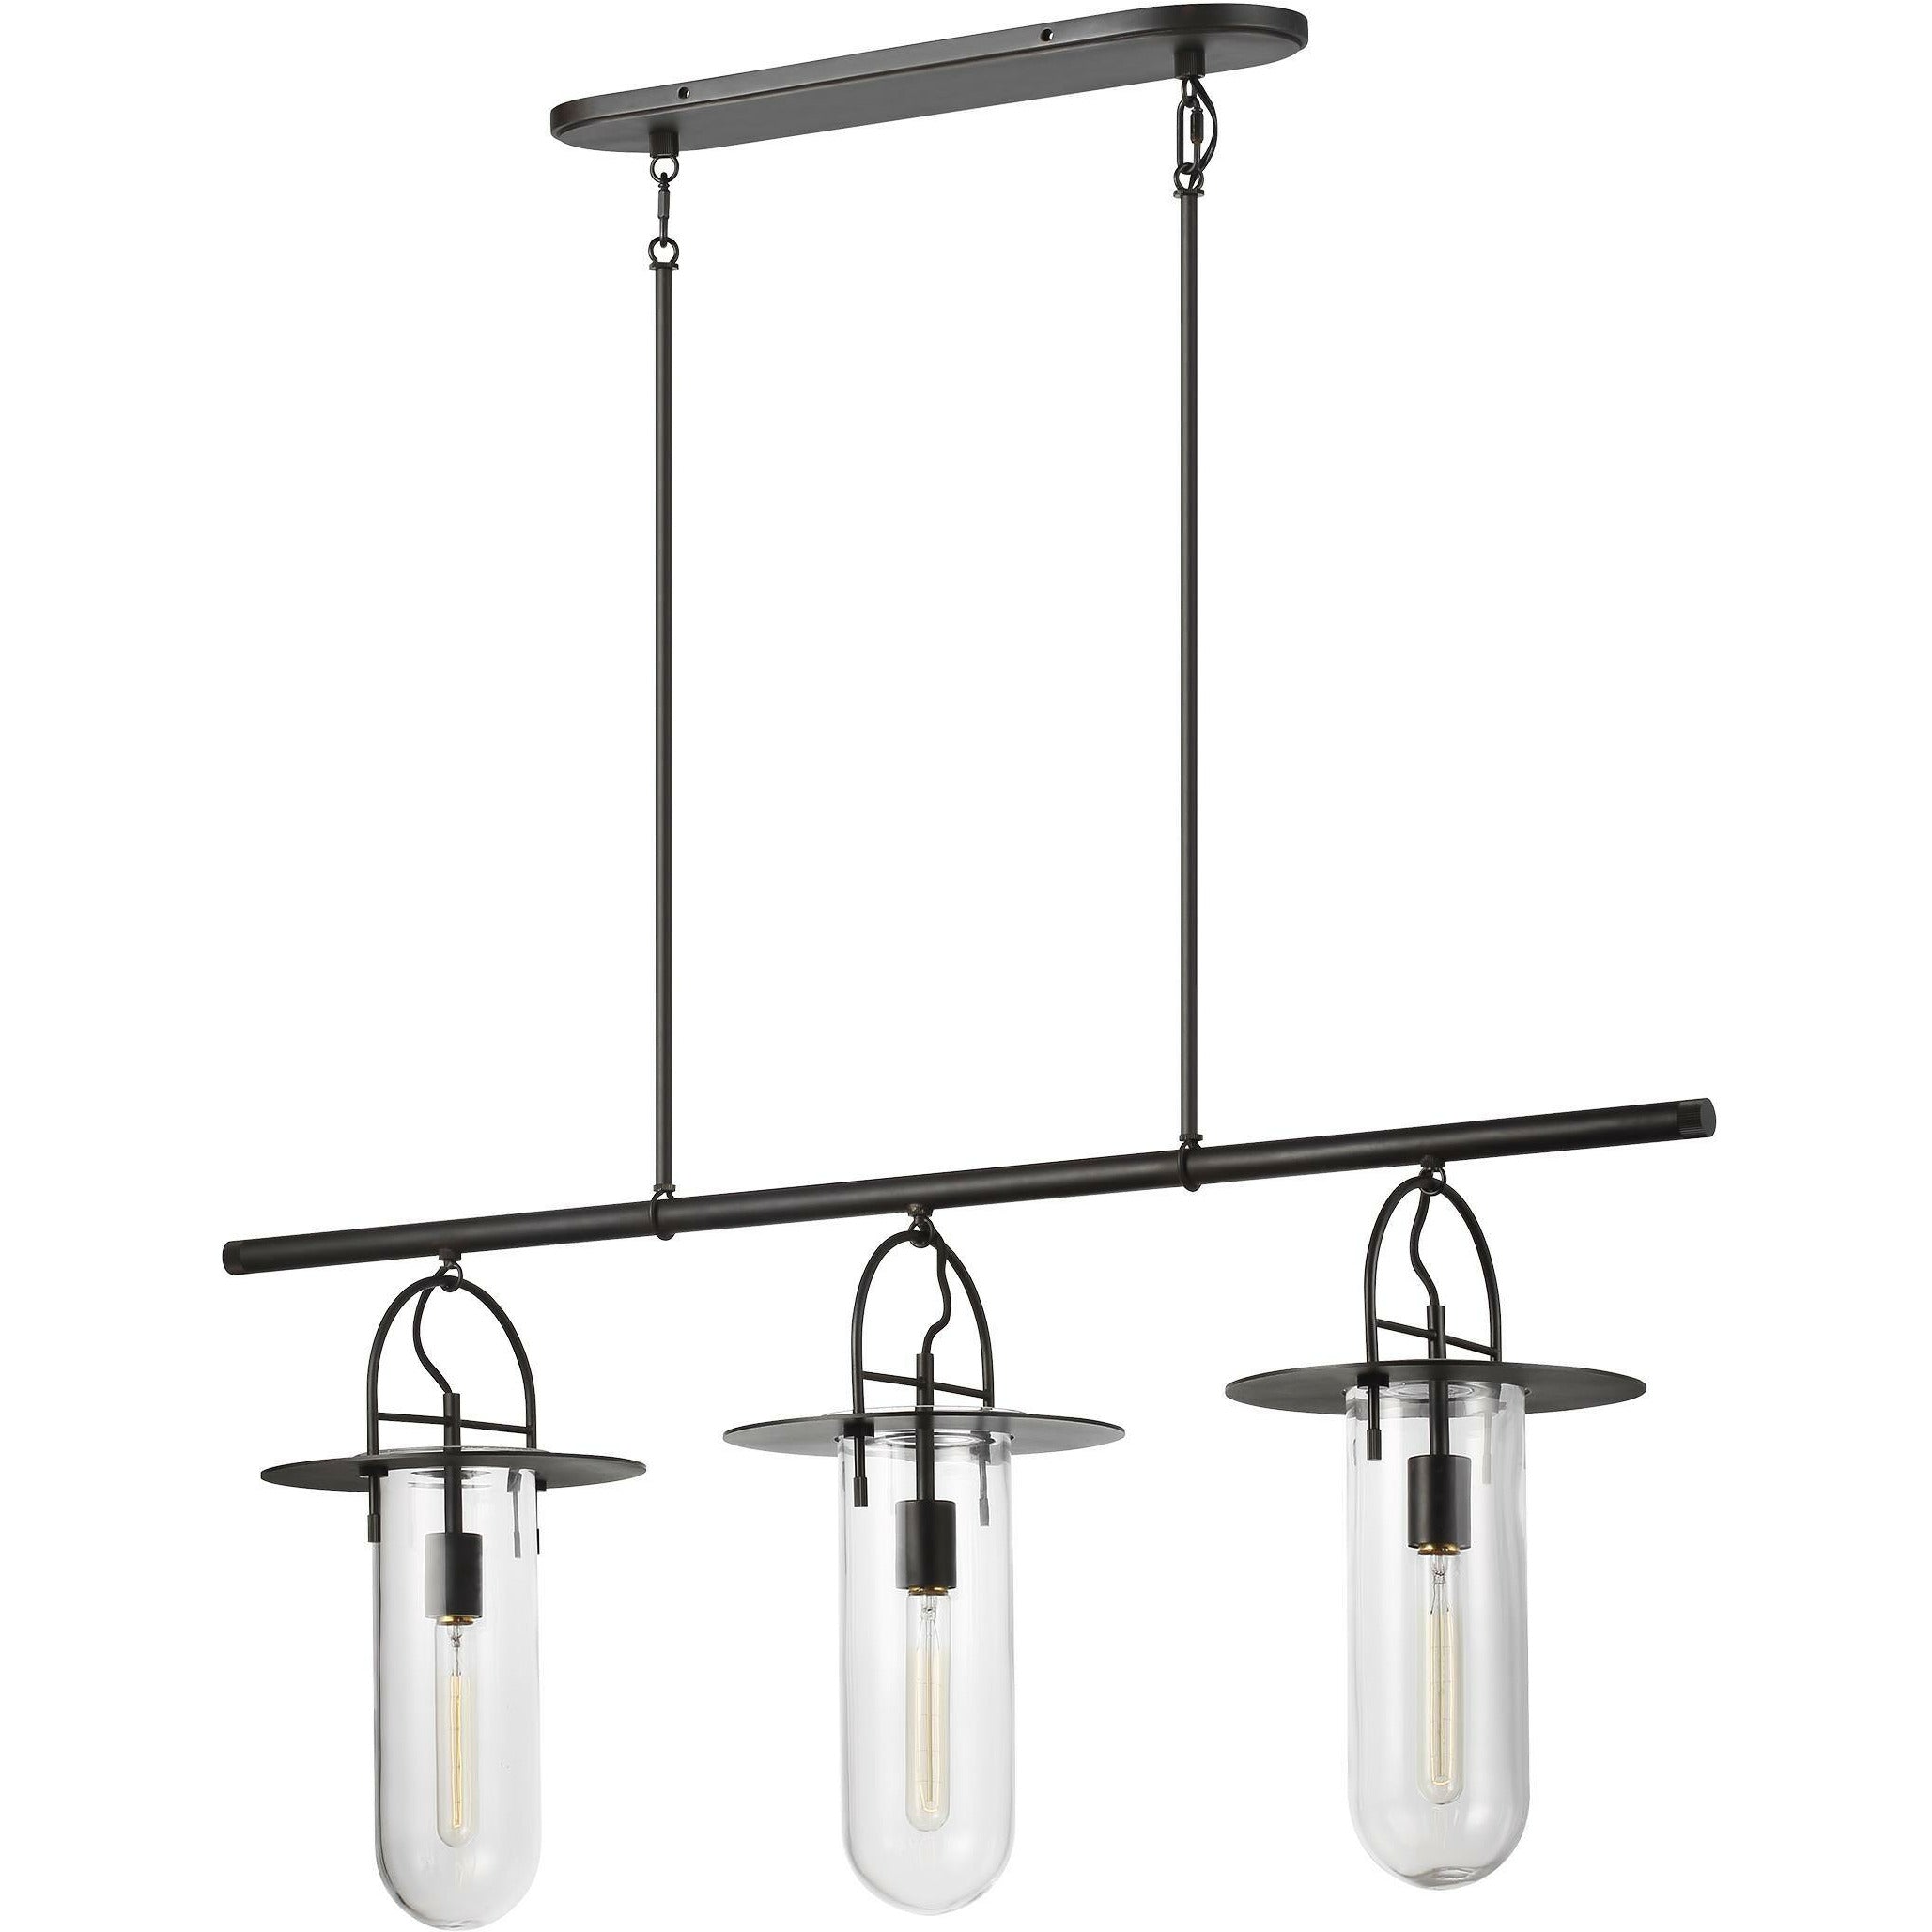 Nuance Linear Suspension Aged Iron